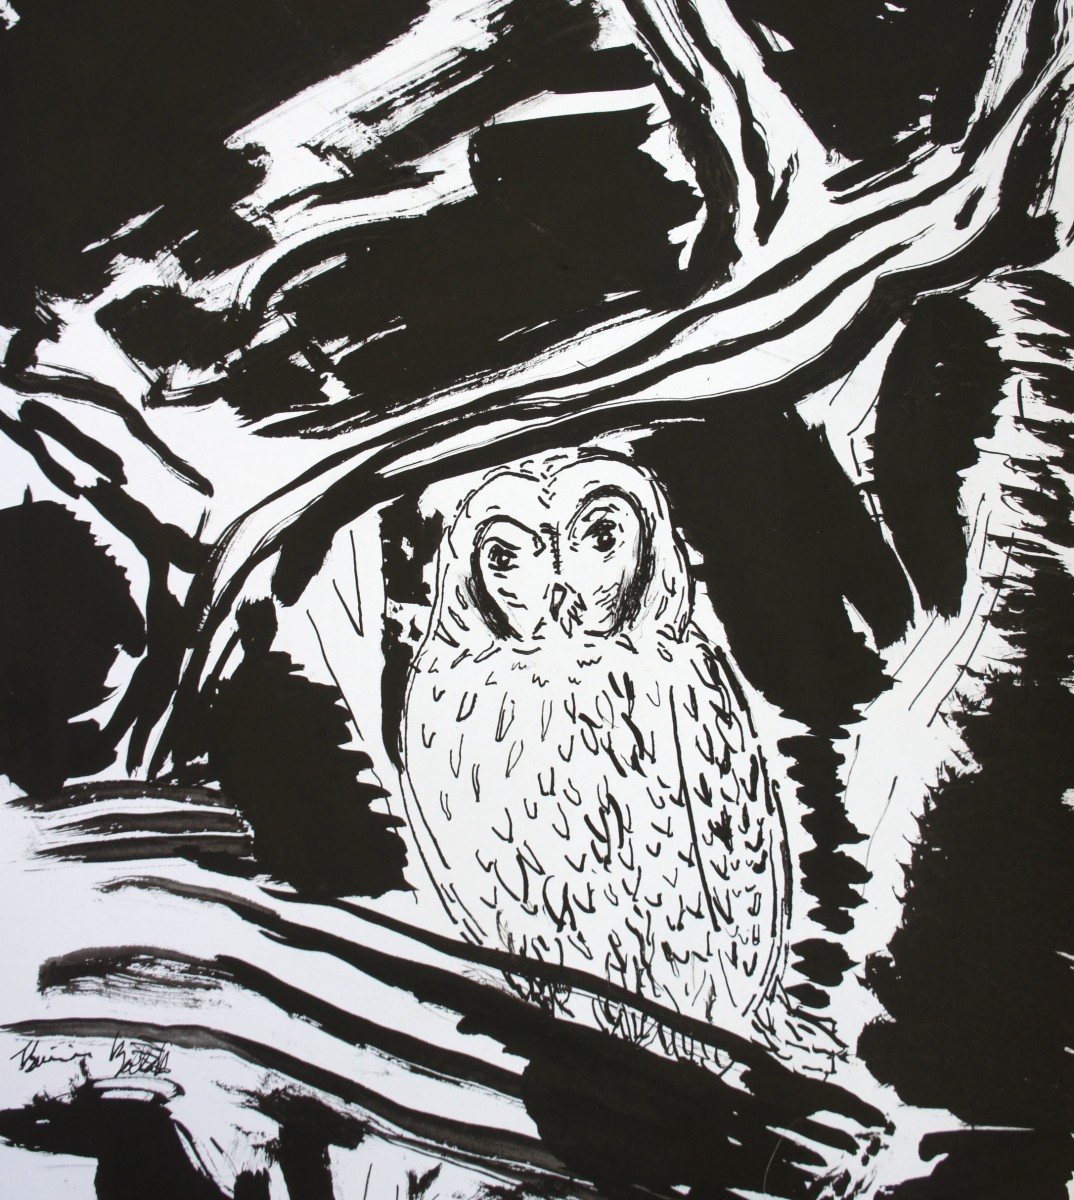 friday-morning-owl-suggests-slowing-down